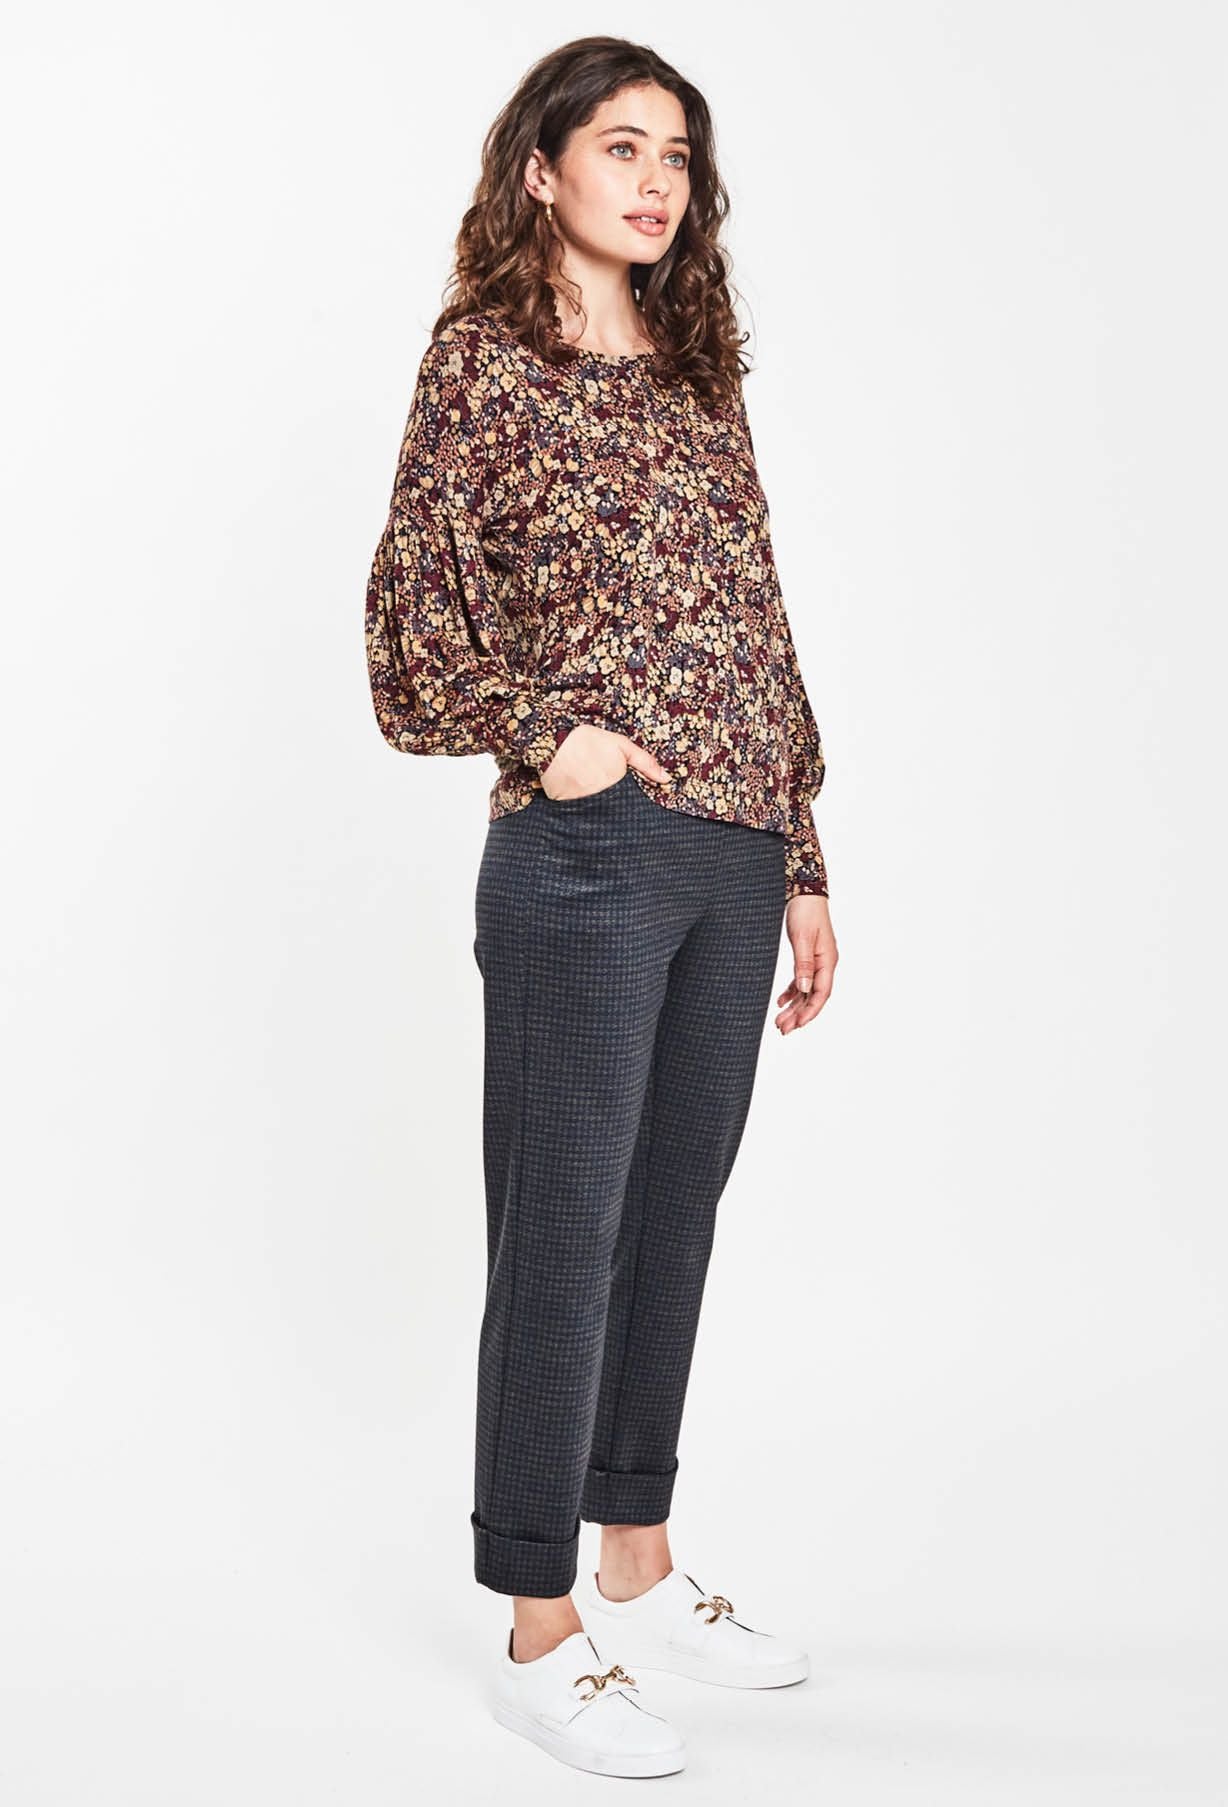 ANNE MARDELL ATLAS PANT - TUNDRA - THE VOGUE STORE